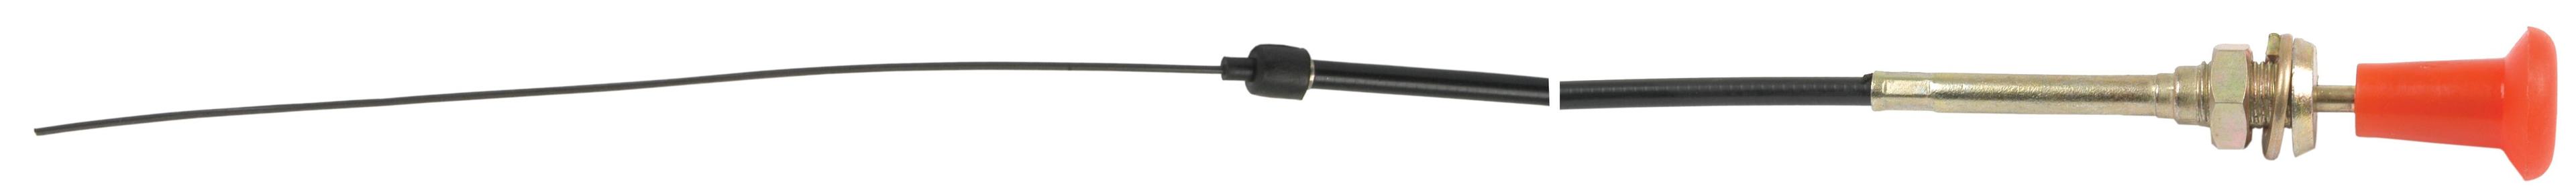 PERKINS CABLE-STOP (2245MM) 14551